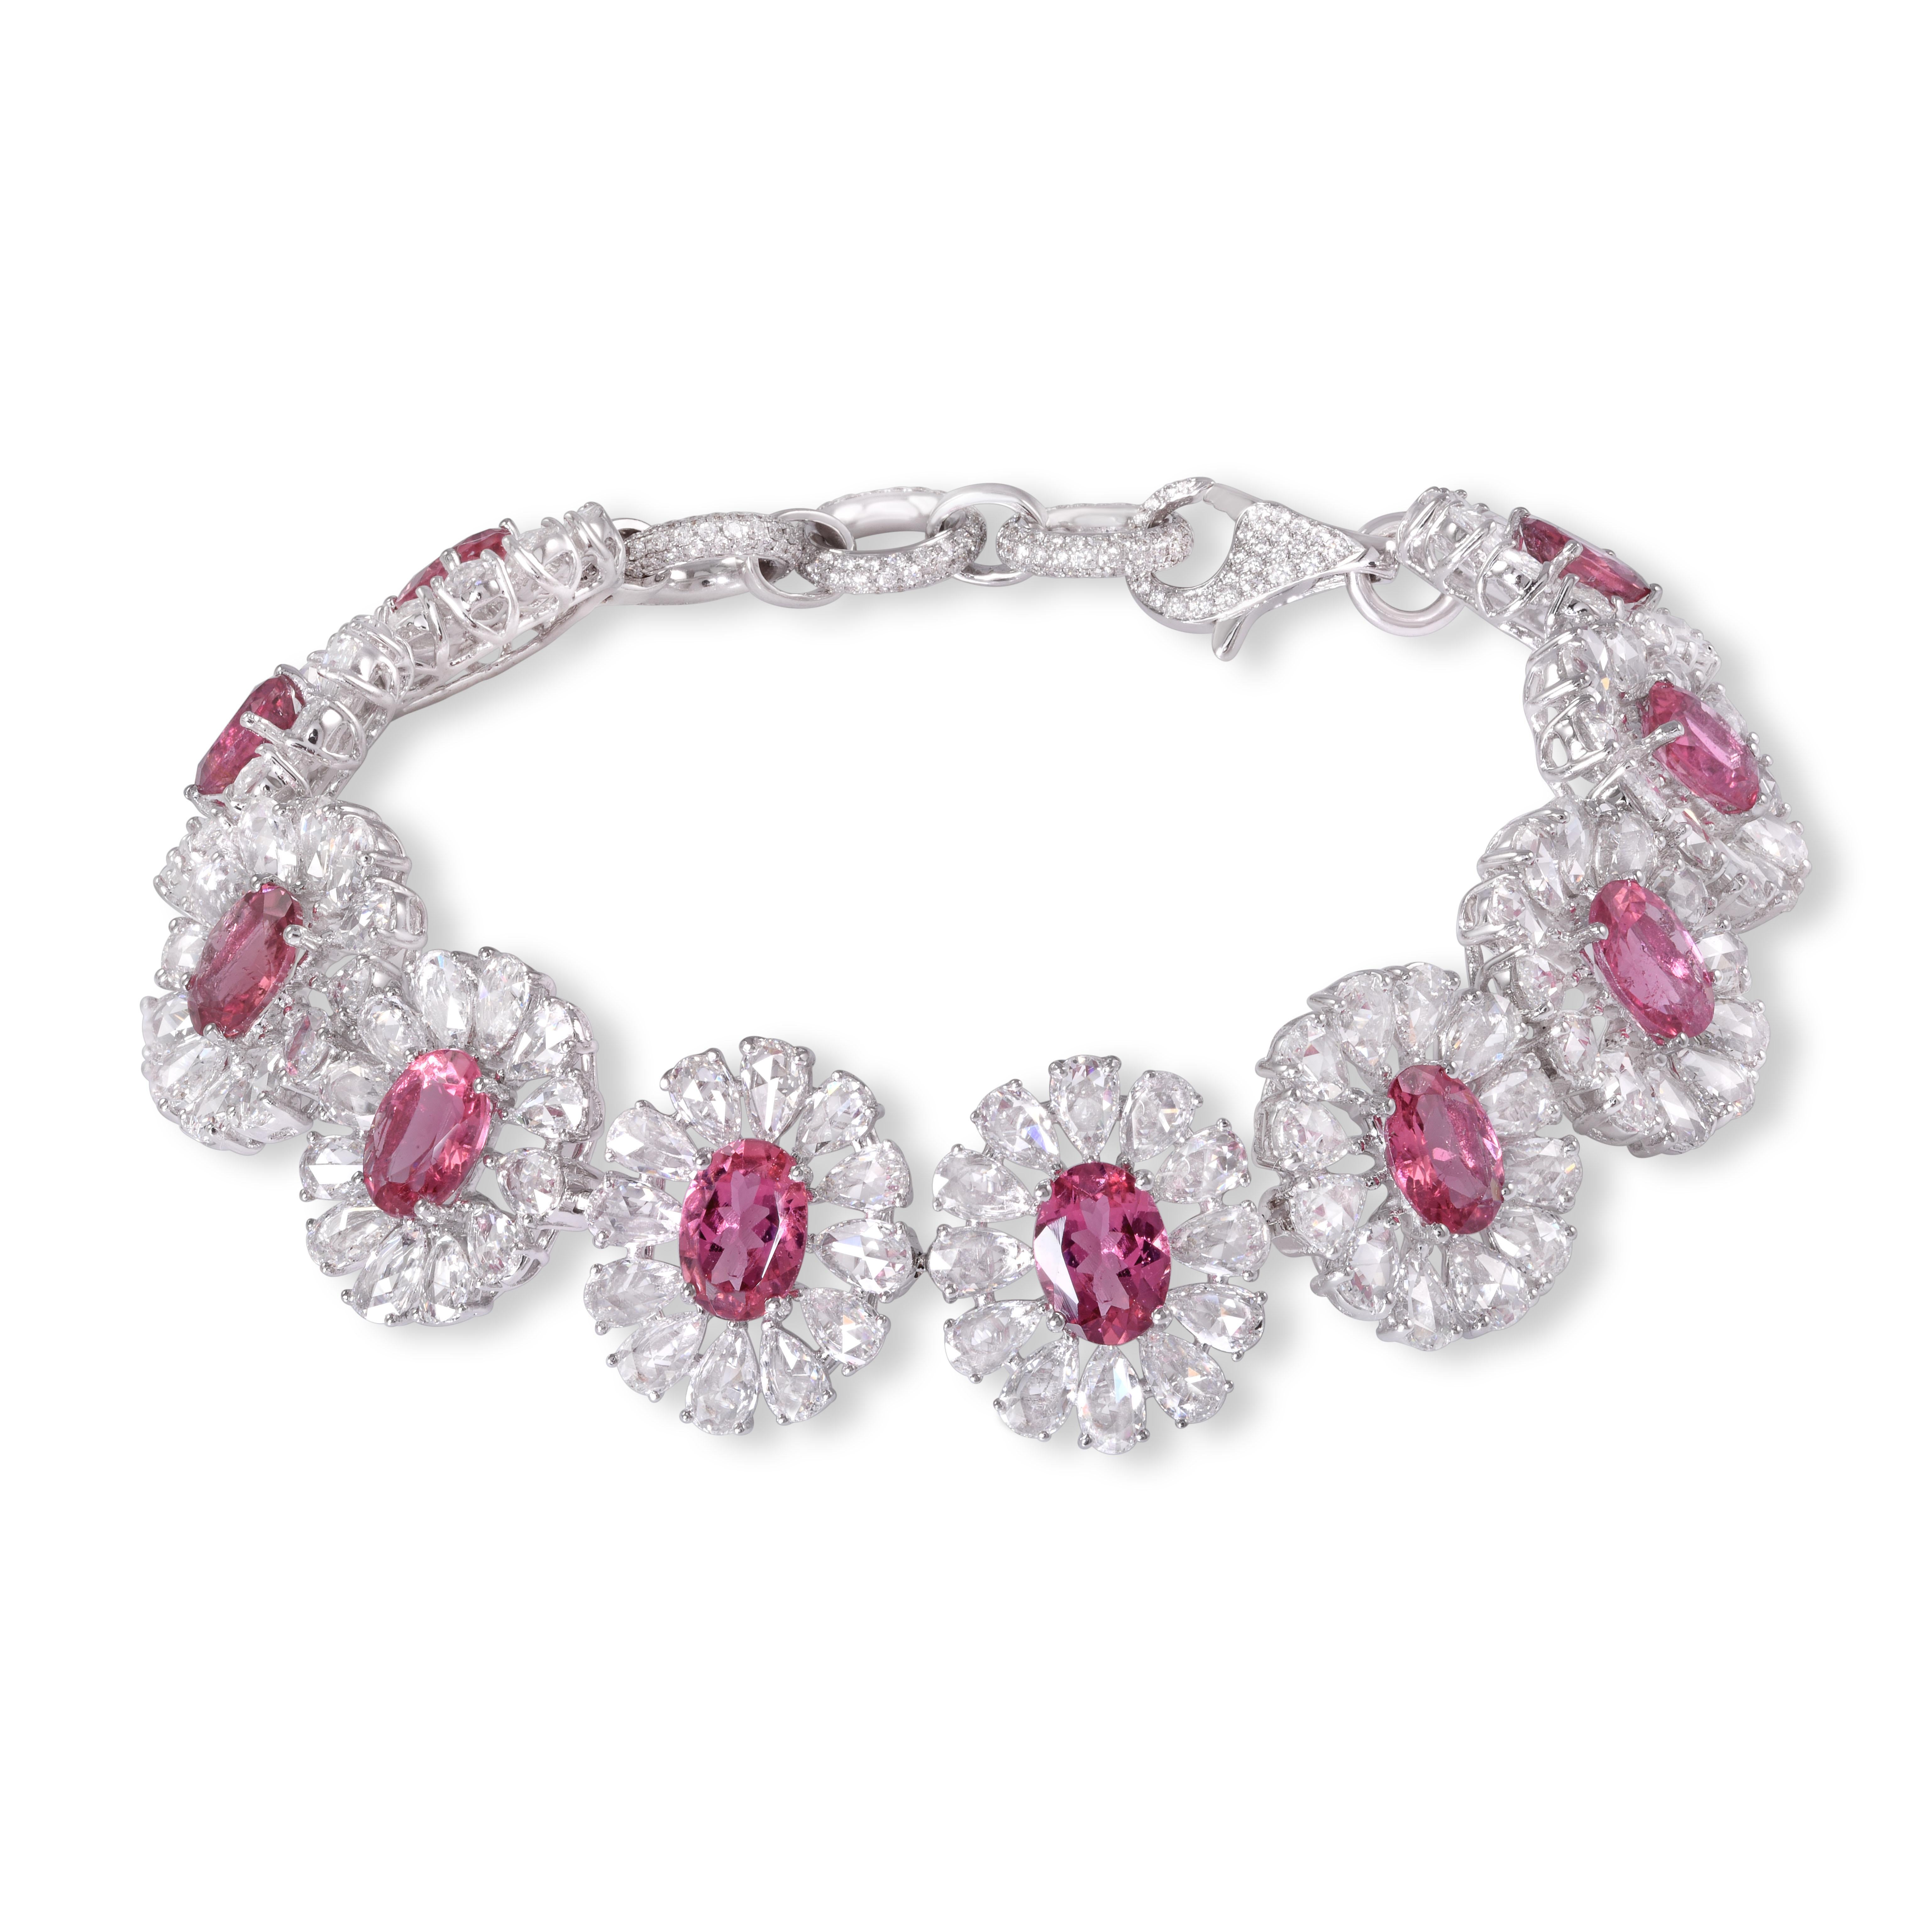 Paying homage to the unrivalled beauty of the flower, the floral clusters of this bracelet echo across the wrist. 6.97cts of playful pink tourmaline are framed by 9.91cts of rose-cut diamonds, forming the petals. 

Total diamond weight 10.58cts.